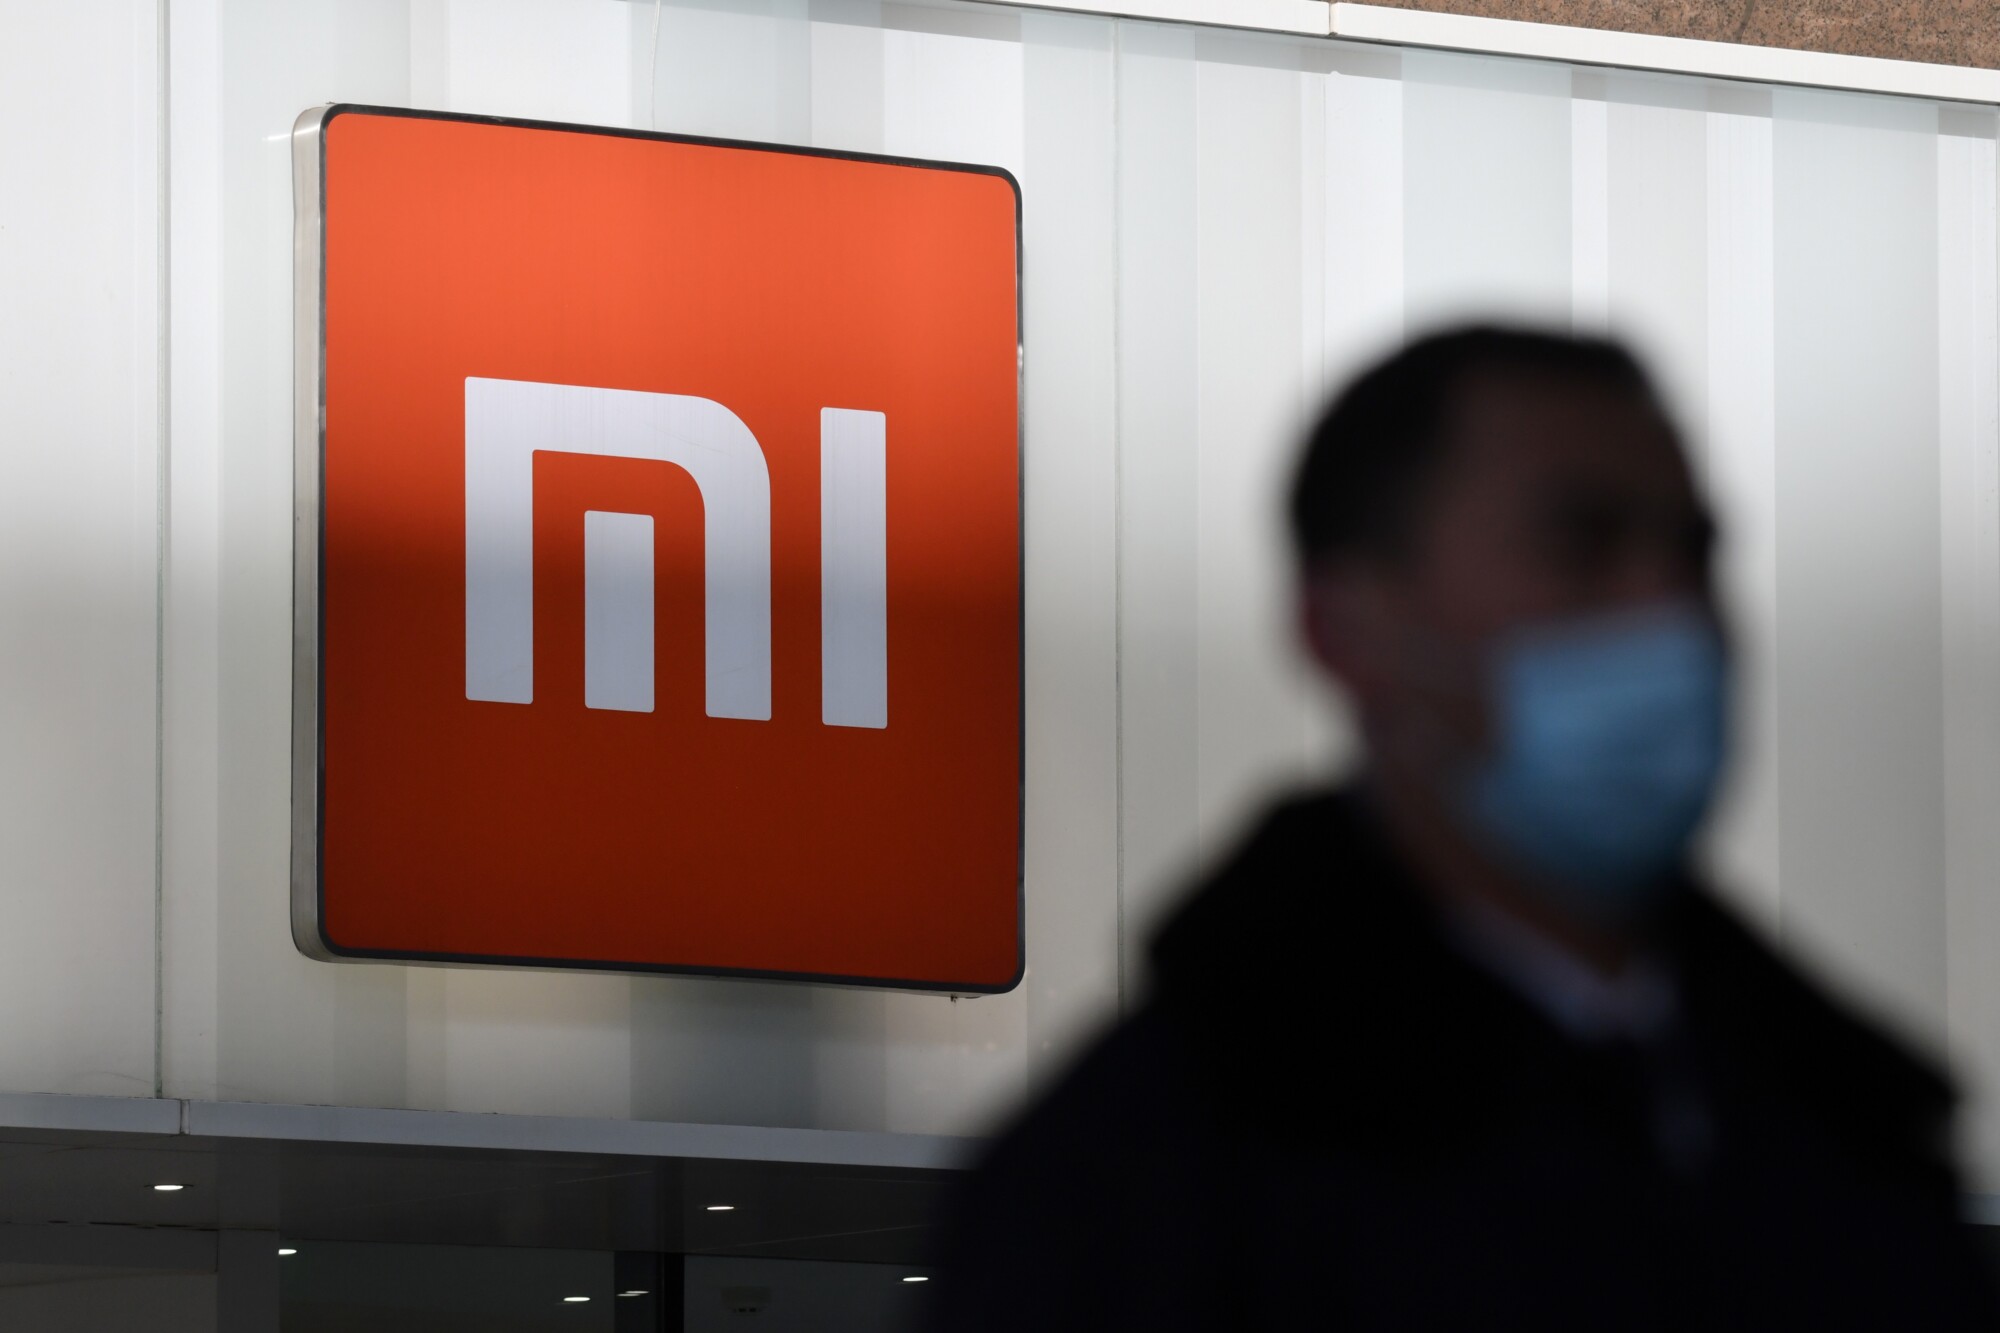 Investment Management Company Adds Xiaomi, Luokung Back to Indexes